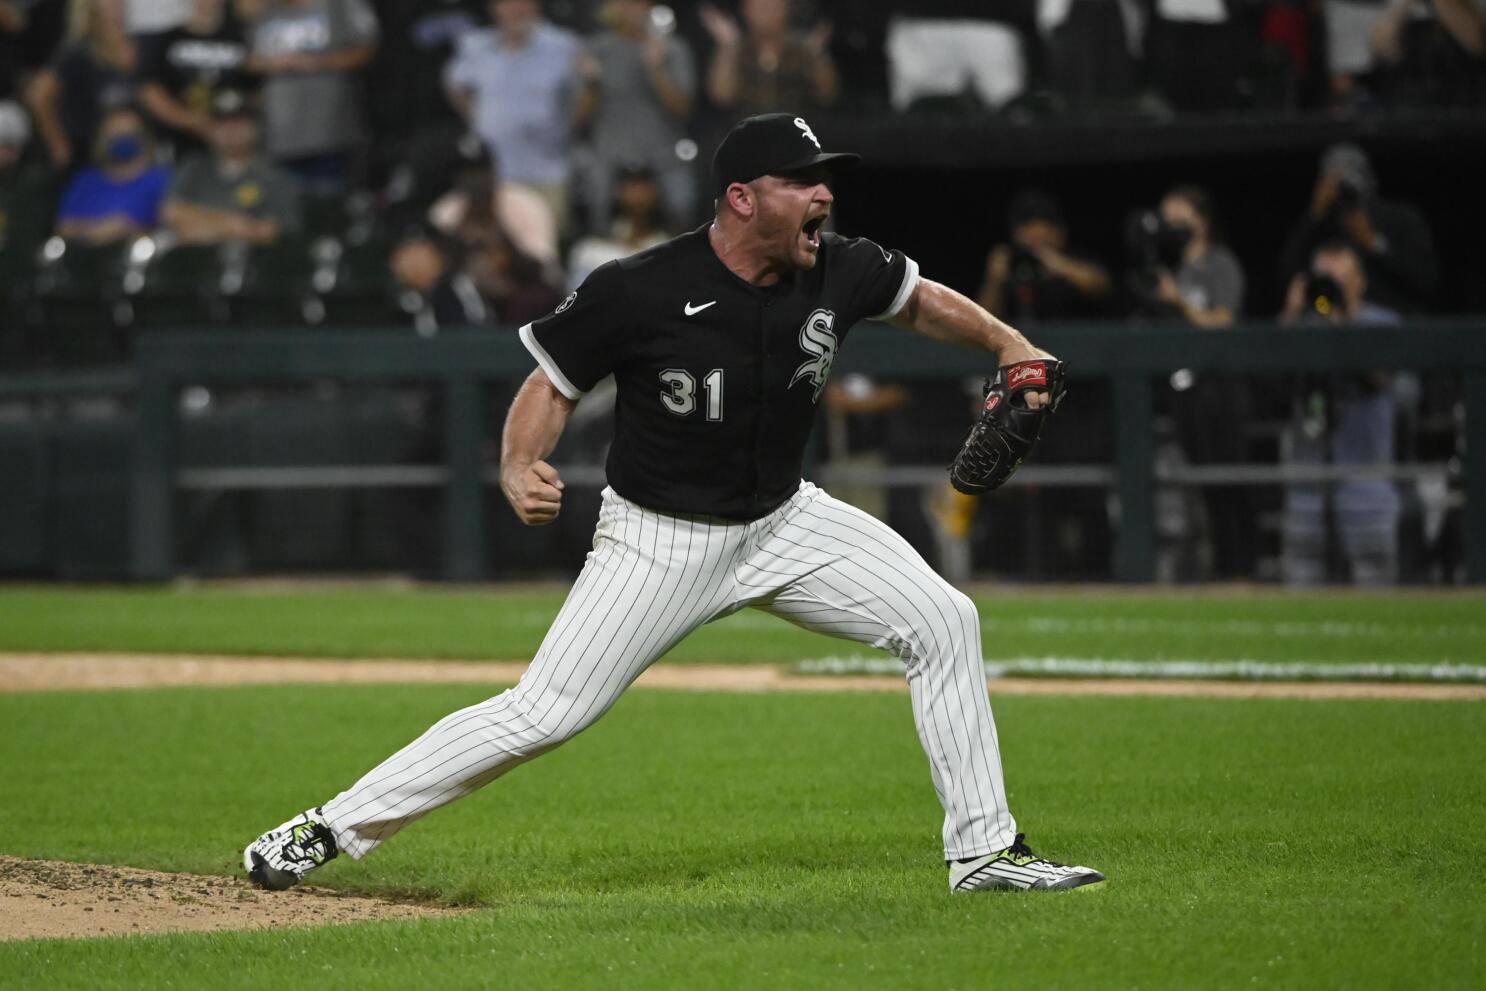 Here is why Kimbrel, not Hendriks, closed for White Sox